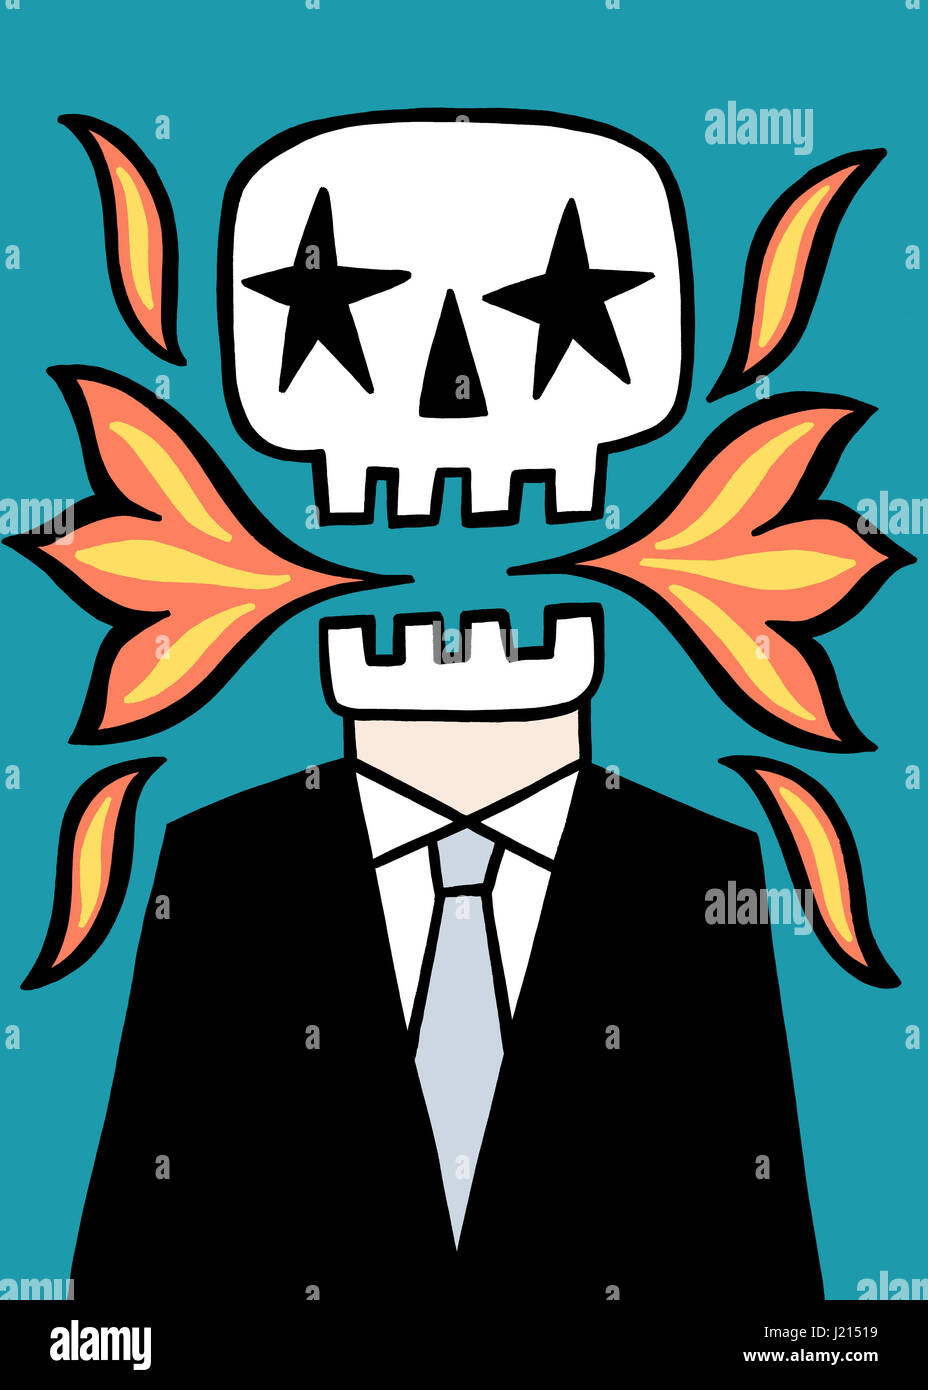 The death of a business man. A business illustration about thinking different thoughts. Stock Photo